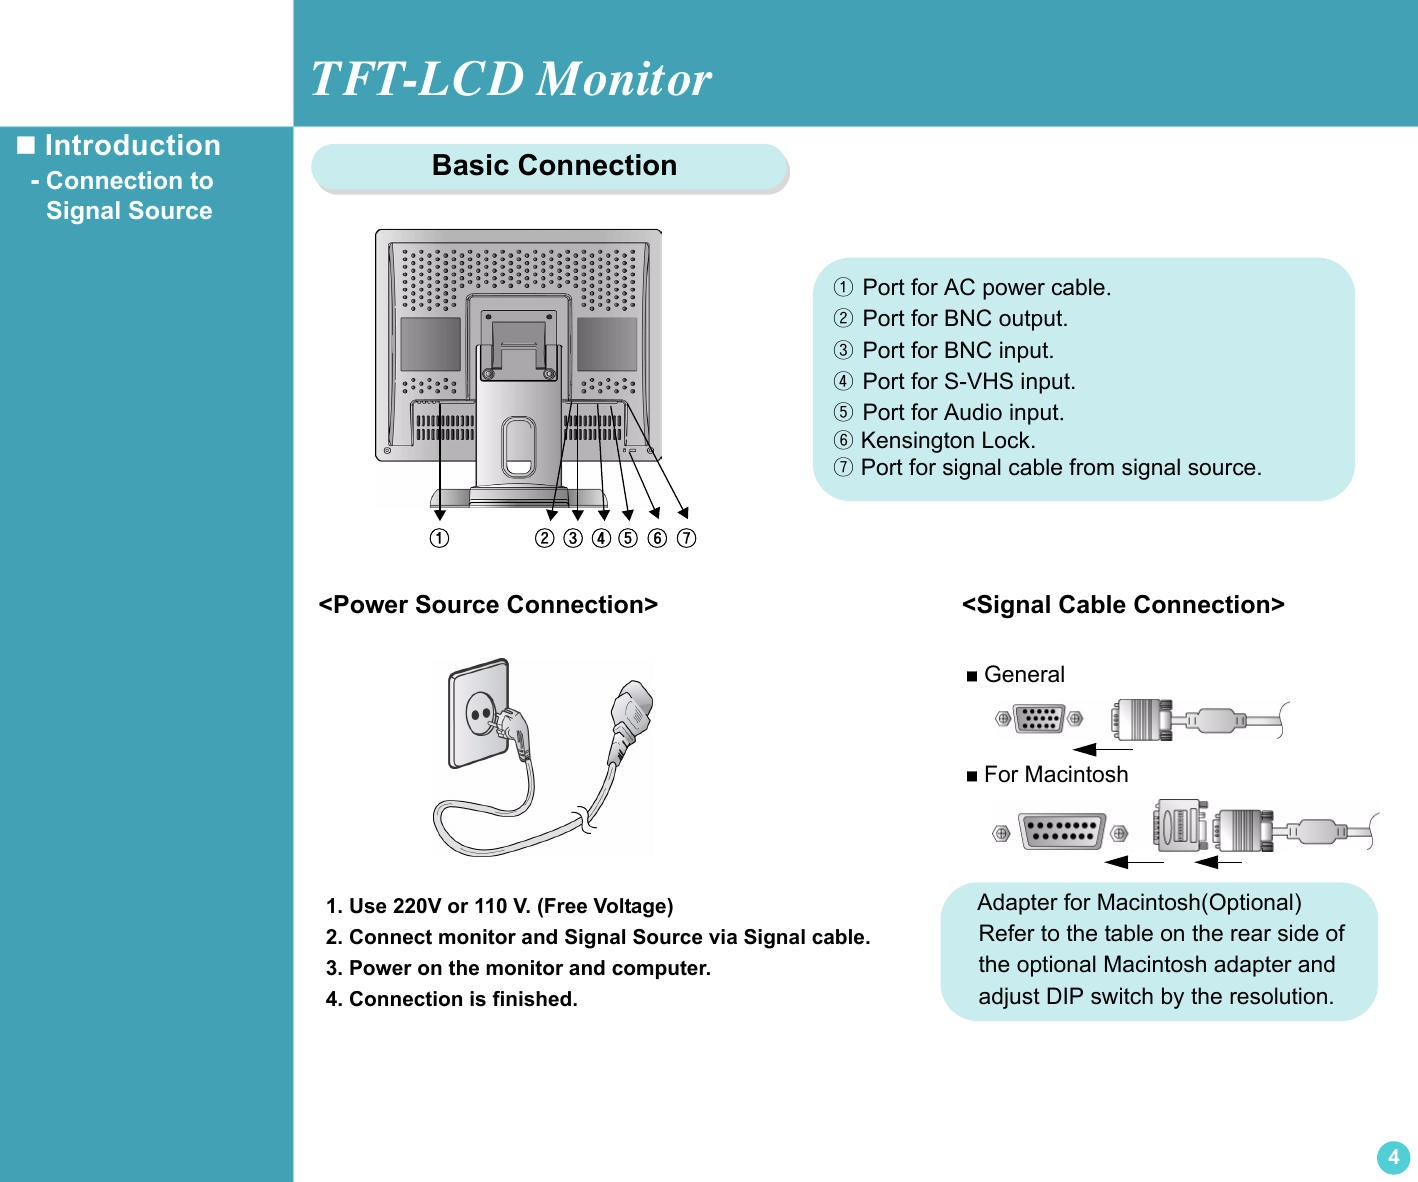 TFT-LCD Monitor4 Introduction  - Connection to     Signal Source &lt;Power Source Connection&gt;                                     &lt;Signal Cable Connection&gt;①① Port for AC power cable.② Port for BNC output.③ Port for BNC input.④ Port for S-VHS input.⑤ Port for Audio input.⑥Kensington Lock.⑦Port for signal cable from signal source.② ③ ④ ⑤ ⑥ ⑦ General For Macintosh    Adapter for Macintosh(Optional)     Refer to the table on the rear side of      the optional Macintosh adapter and      adjust DIP switch by the resolution.1. Use 220V or 110 V. (Free Voltage)2. Connect monitor and Signal Source via Signal cable.3. Power on the monitor and computer.4. Connection is finished.           Basic Connection